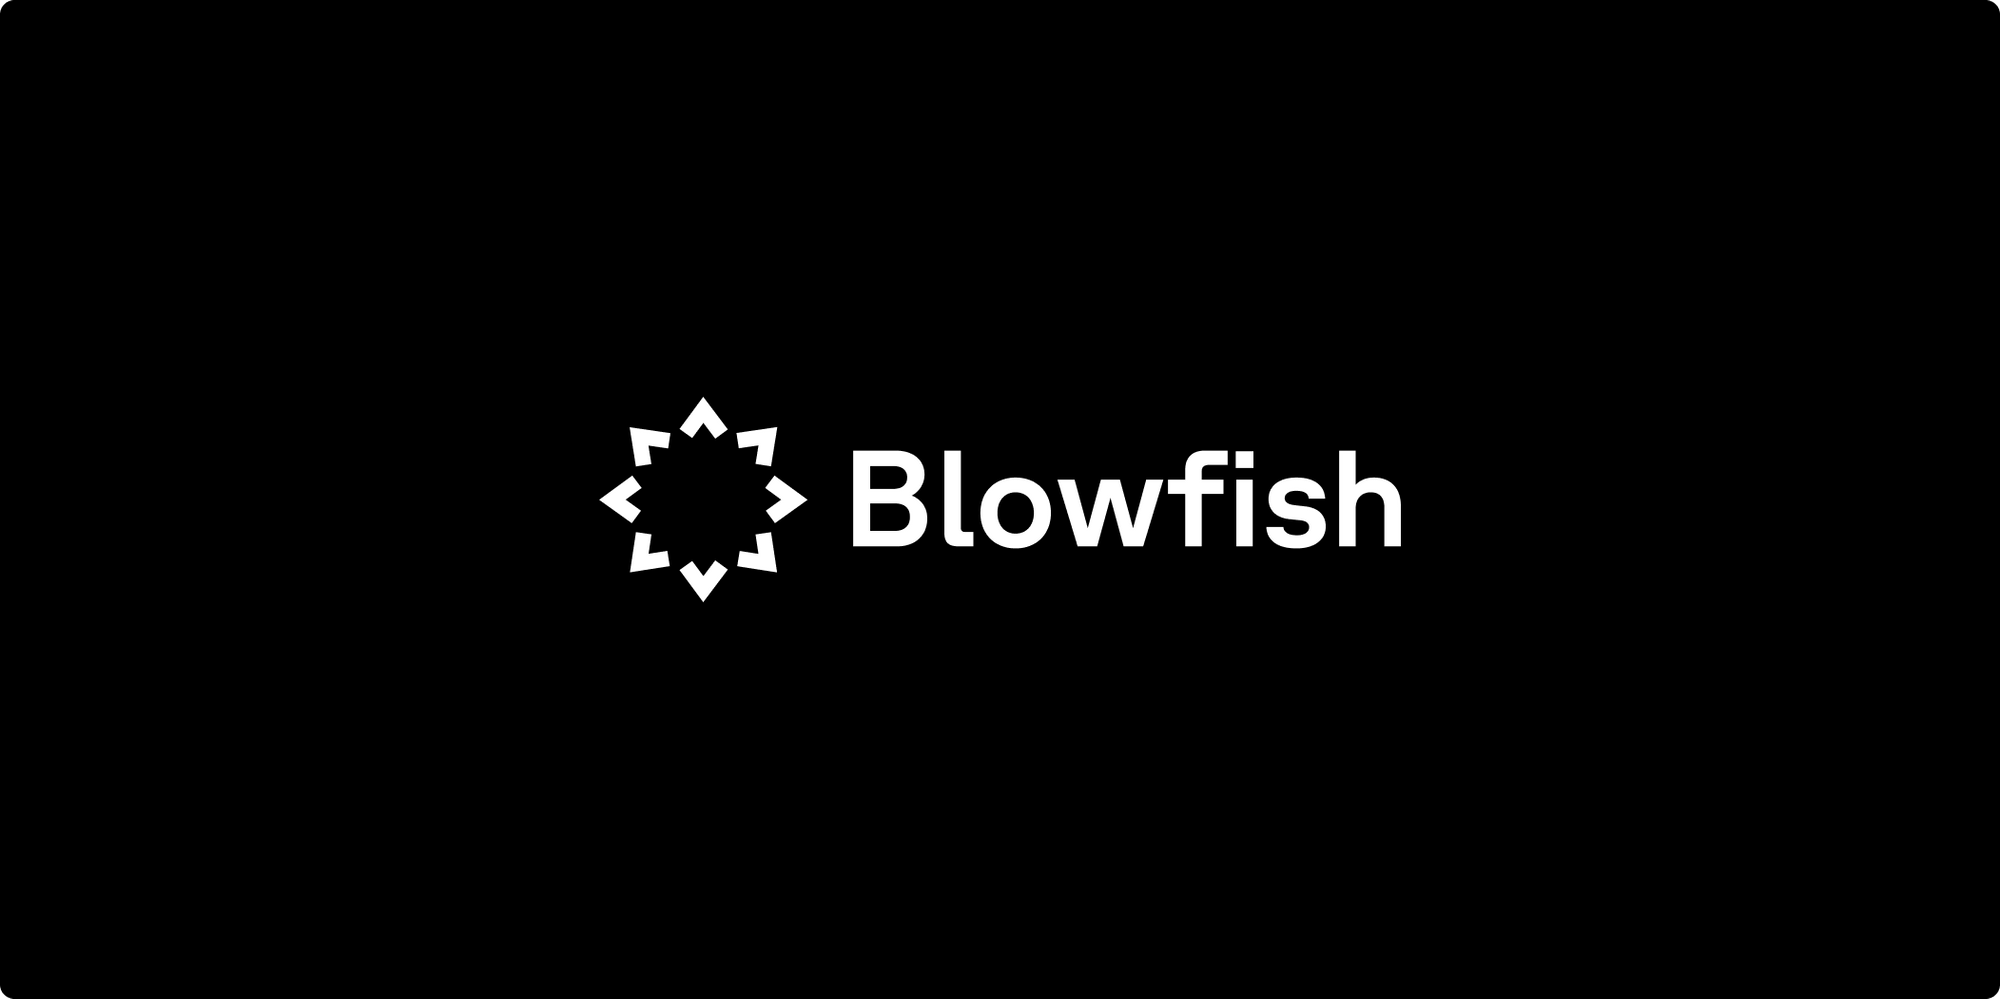 Introducing Blowfish, the Security Service Your Web3 Wallet Needs